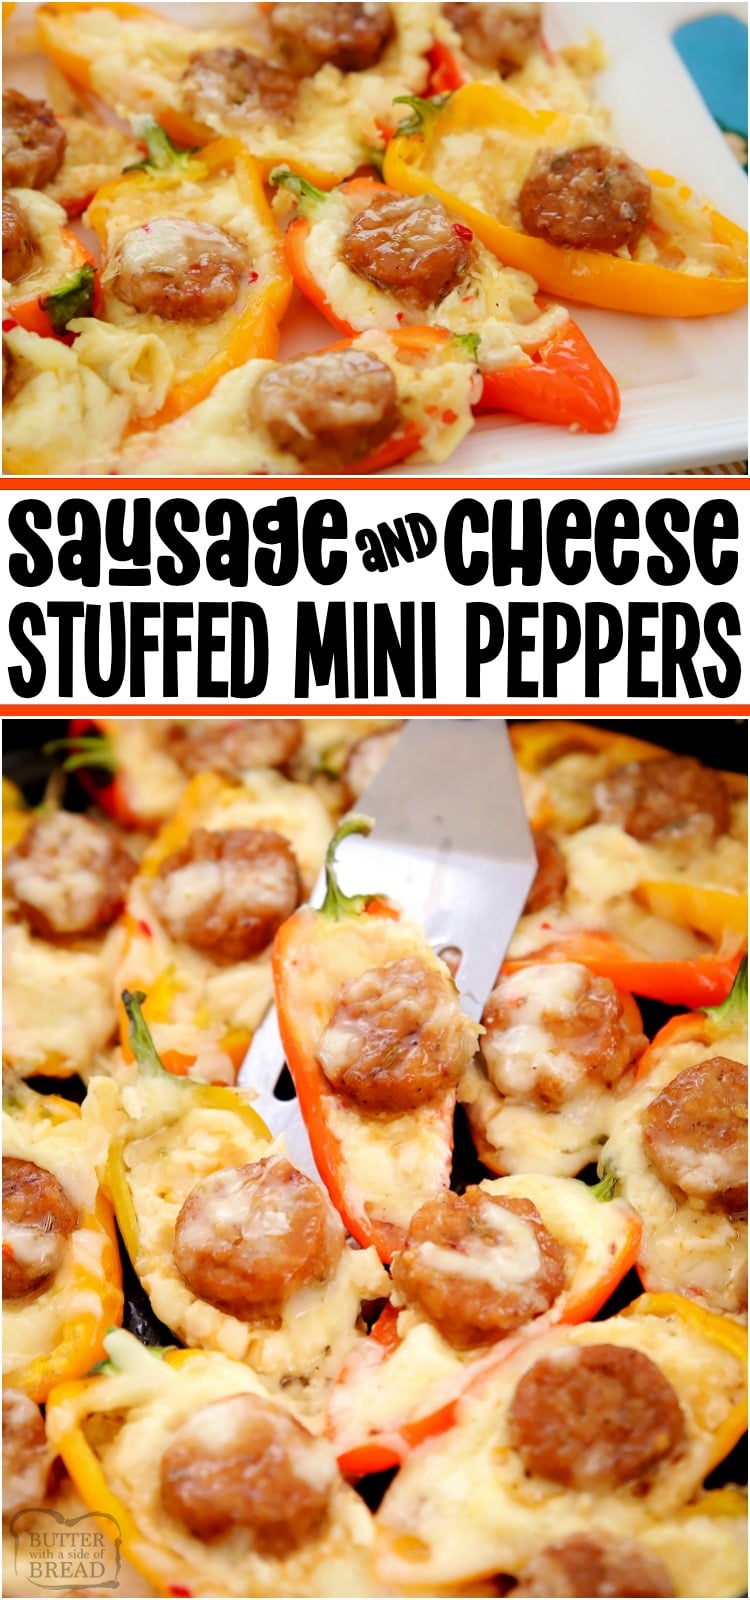 Stuffed Mini Peppers filled with Italian Sausage, cream cheese and Pepper Jack for a hearty, flavorful appetizer everyone loves! #peppers #minipeppers #stuffedpepper #ItalianSausage #Cheese #appetizer #recipe from BUTTER WITH A SIDE OF BREAD